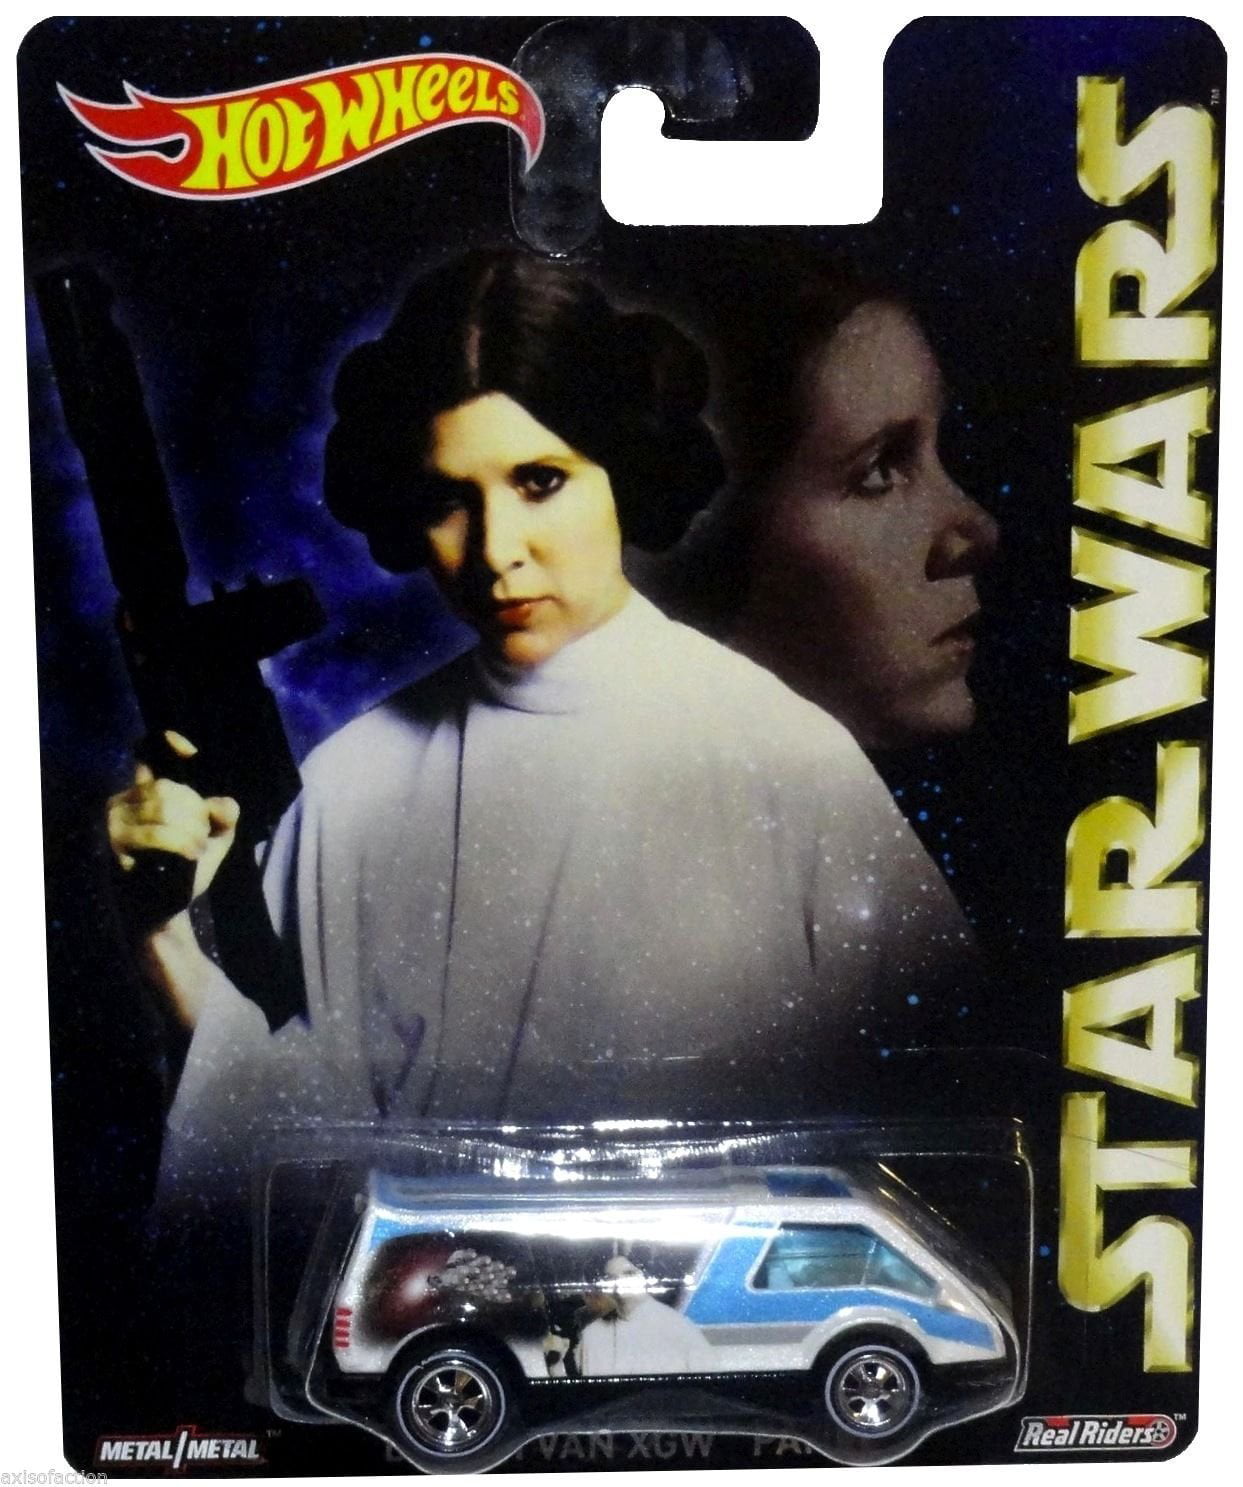 HOTWHEELS NEW STAR WARS PRINCESS LEA'S DREAM VAN WITH REAL RIDER RUBBER TYRES| 